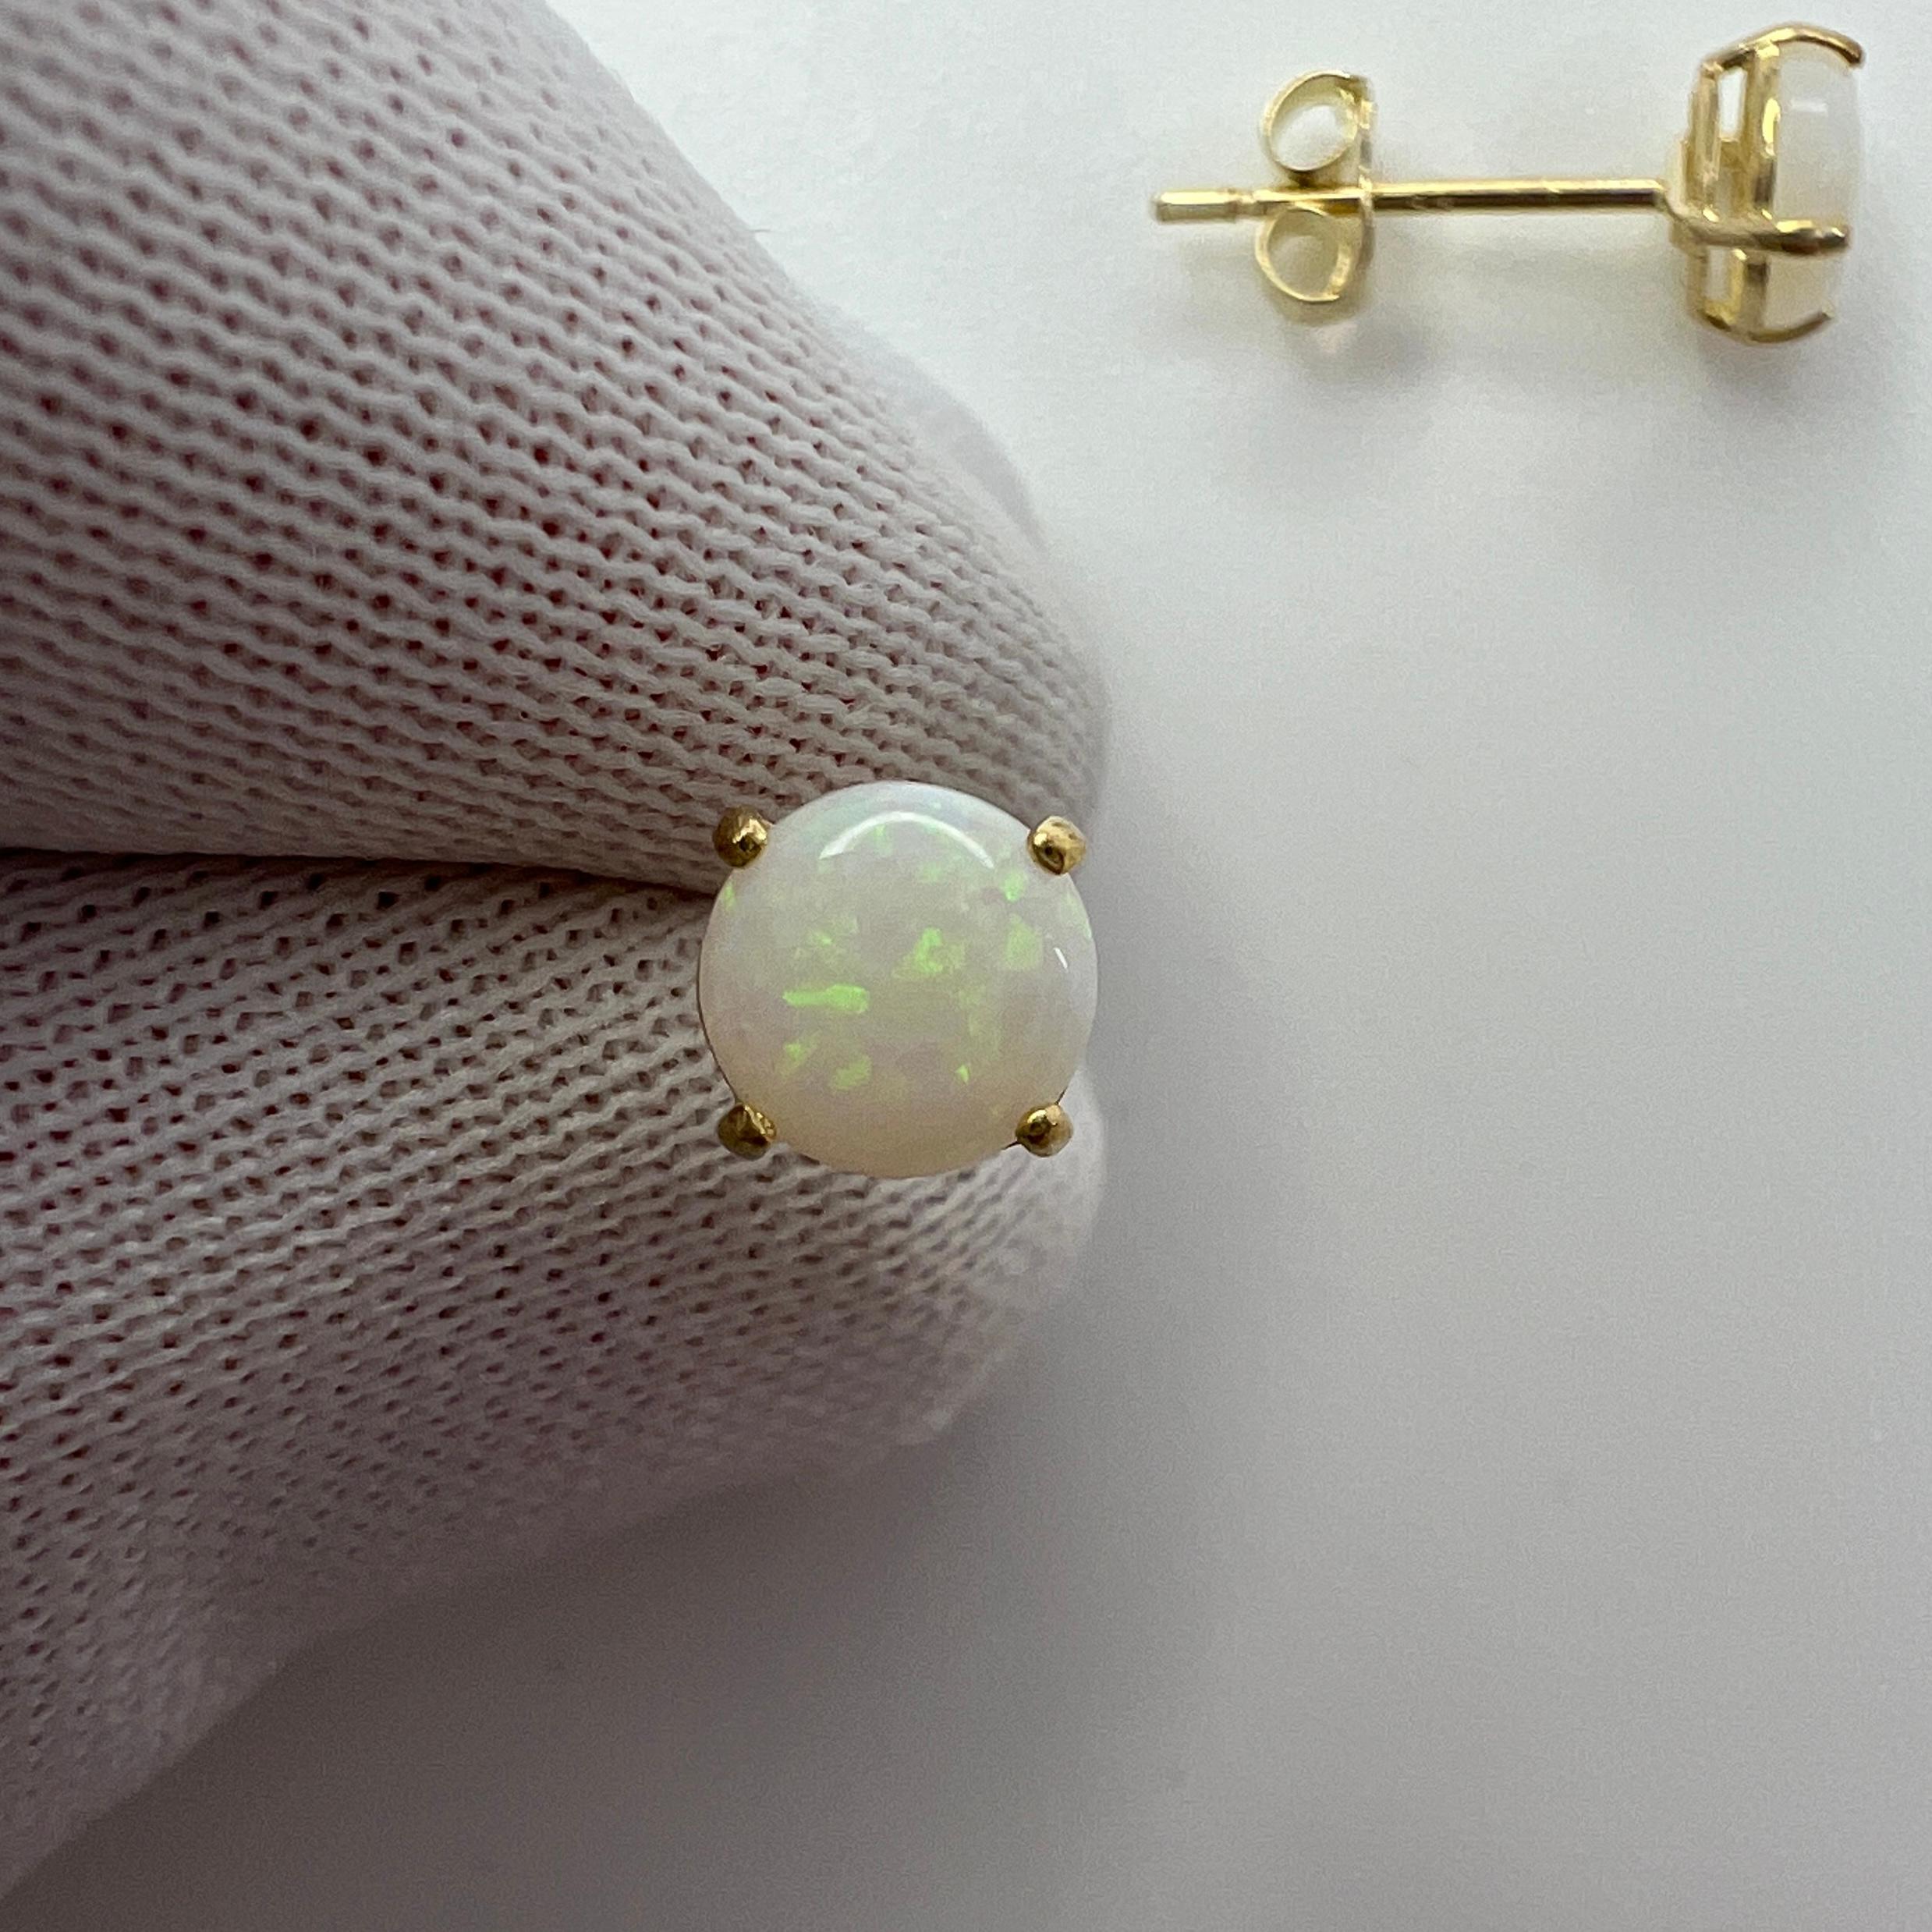 Natural White Opal Yellow Gold Stud Earrings.

Beautiful 5mm matching pair of opals with excellent colour, clarity and round cabochon cut.

The gemstones may vary slightly from the images as these studs are made to order and selected from a parcel